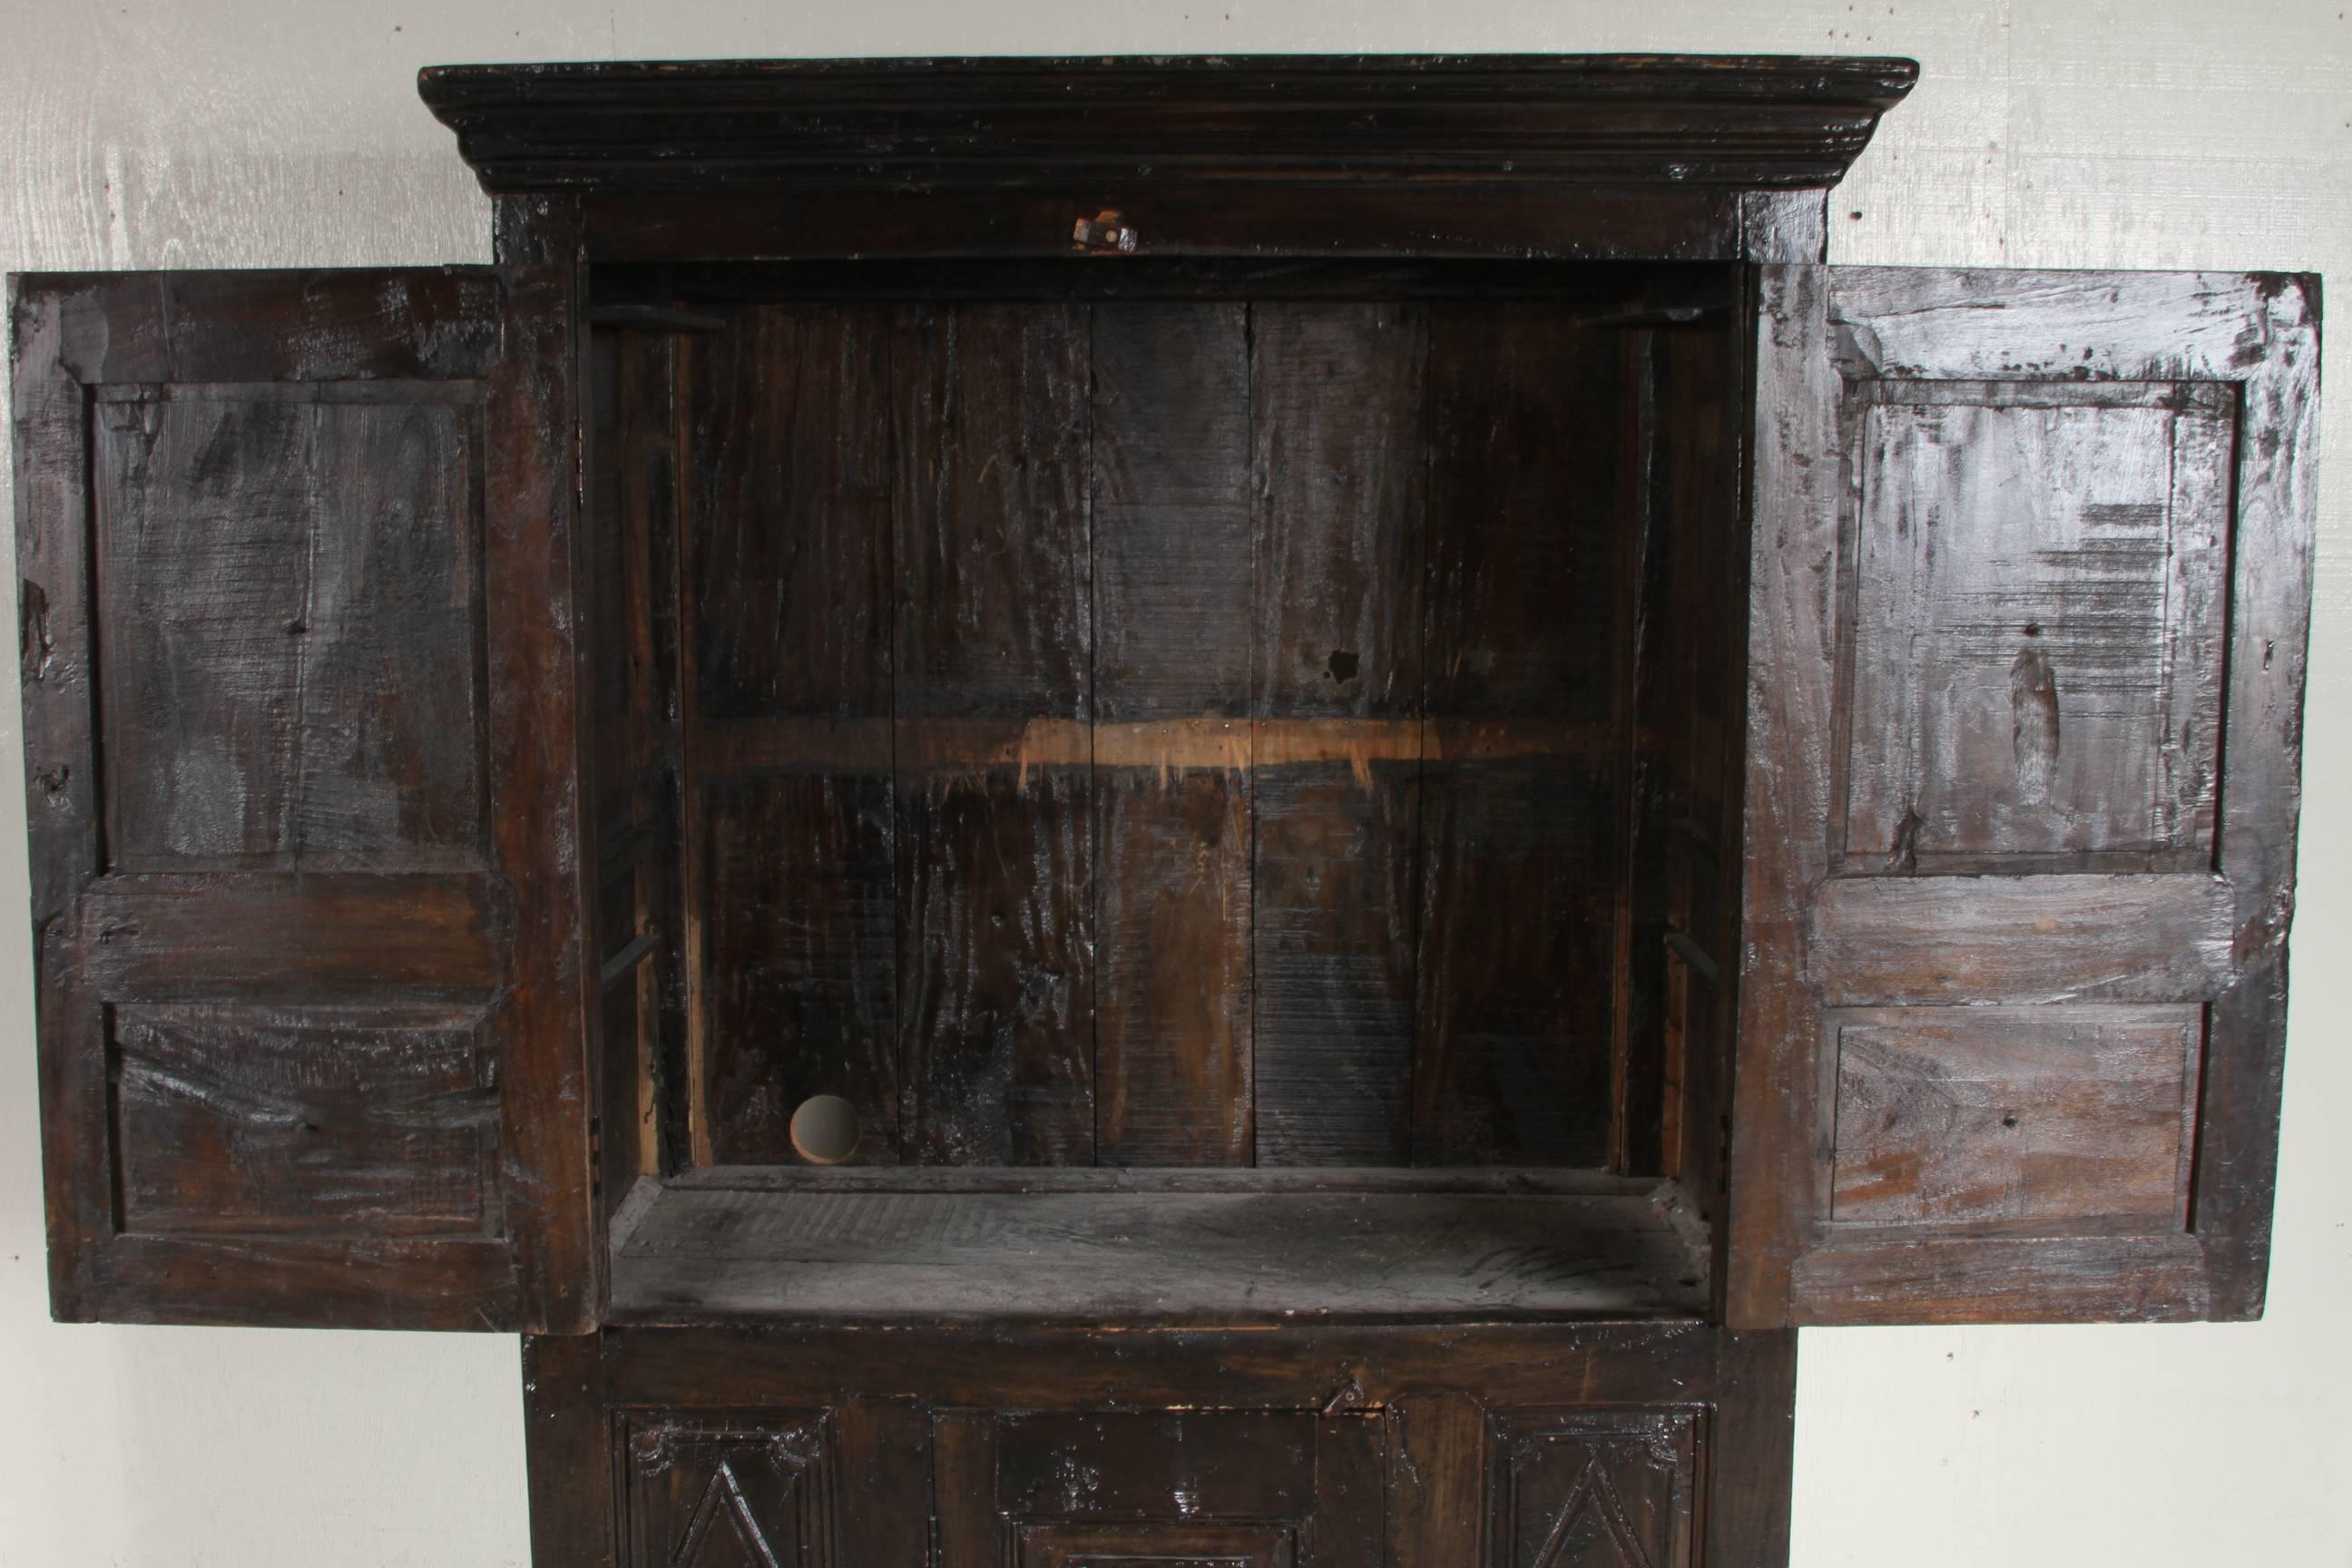 This well-made, solid and ornate armoir was converted to an entertainment cabinet, shelf has been removed and a hole was cut into the back for wiring. Rectangular starburst are carved into the two upper doors and bottom door which reveals an